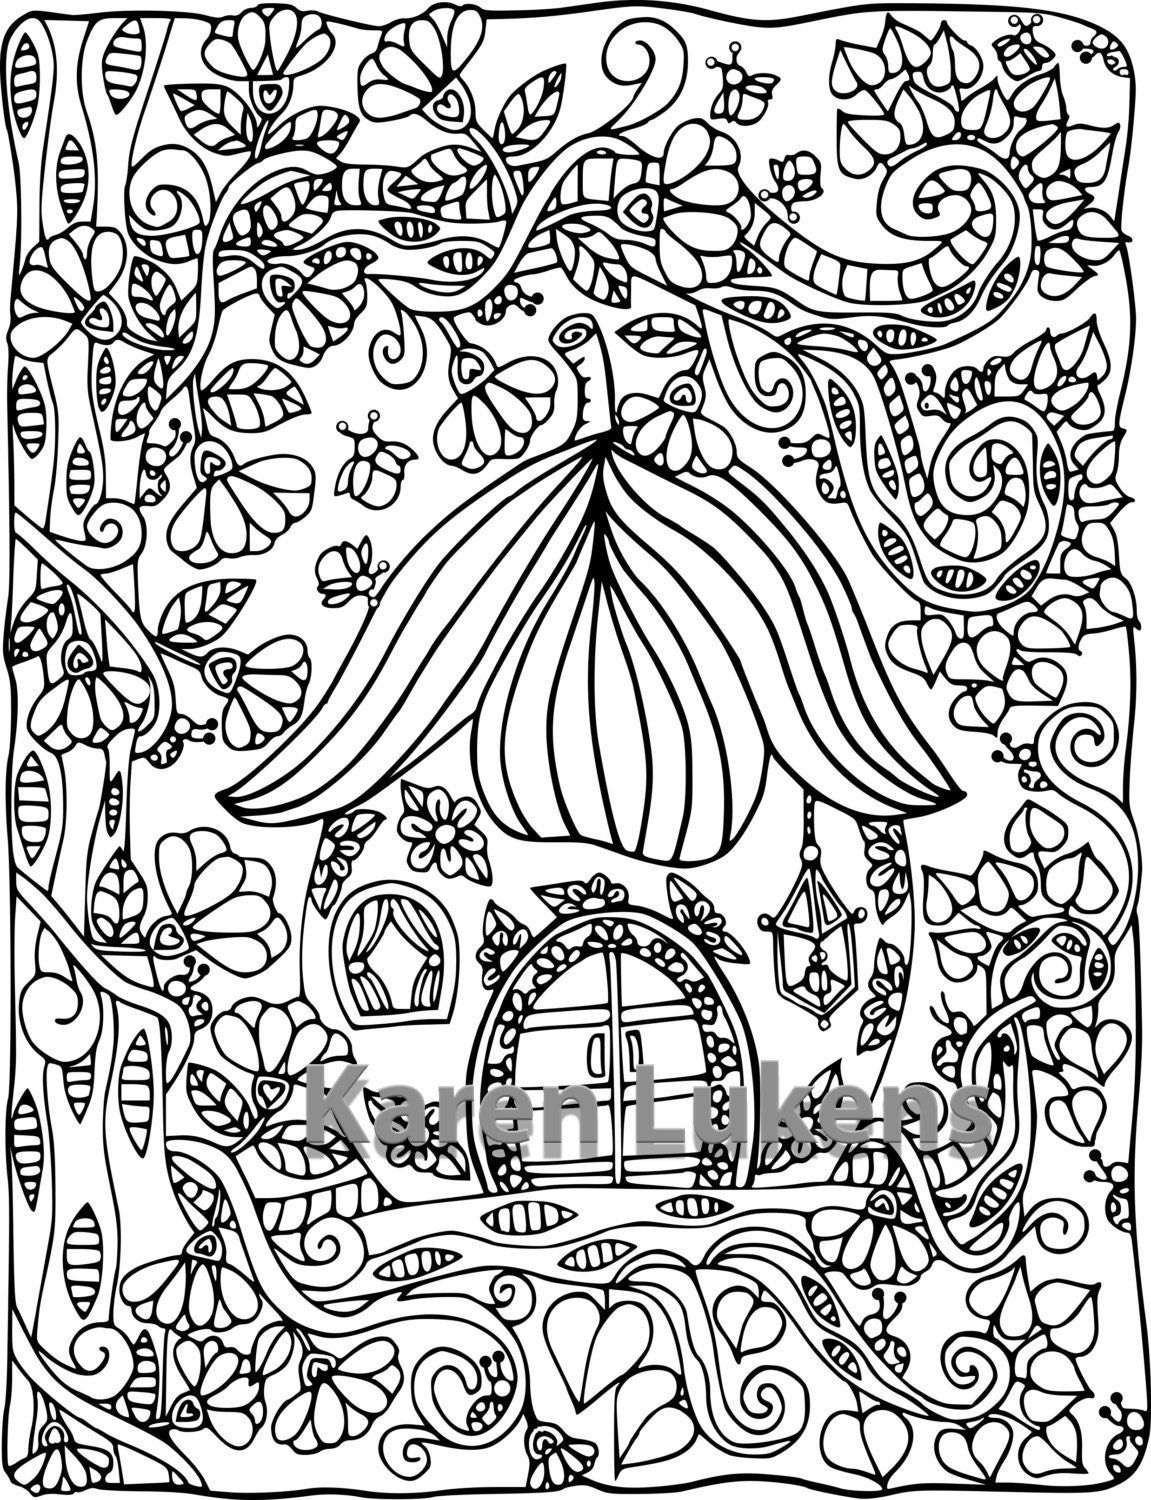 Download Happyville Fairy House 1 1 Adult Coloring Book Page